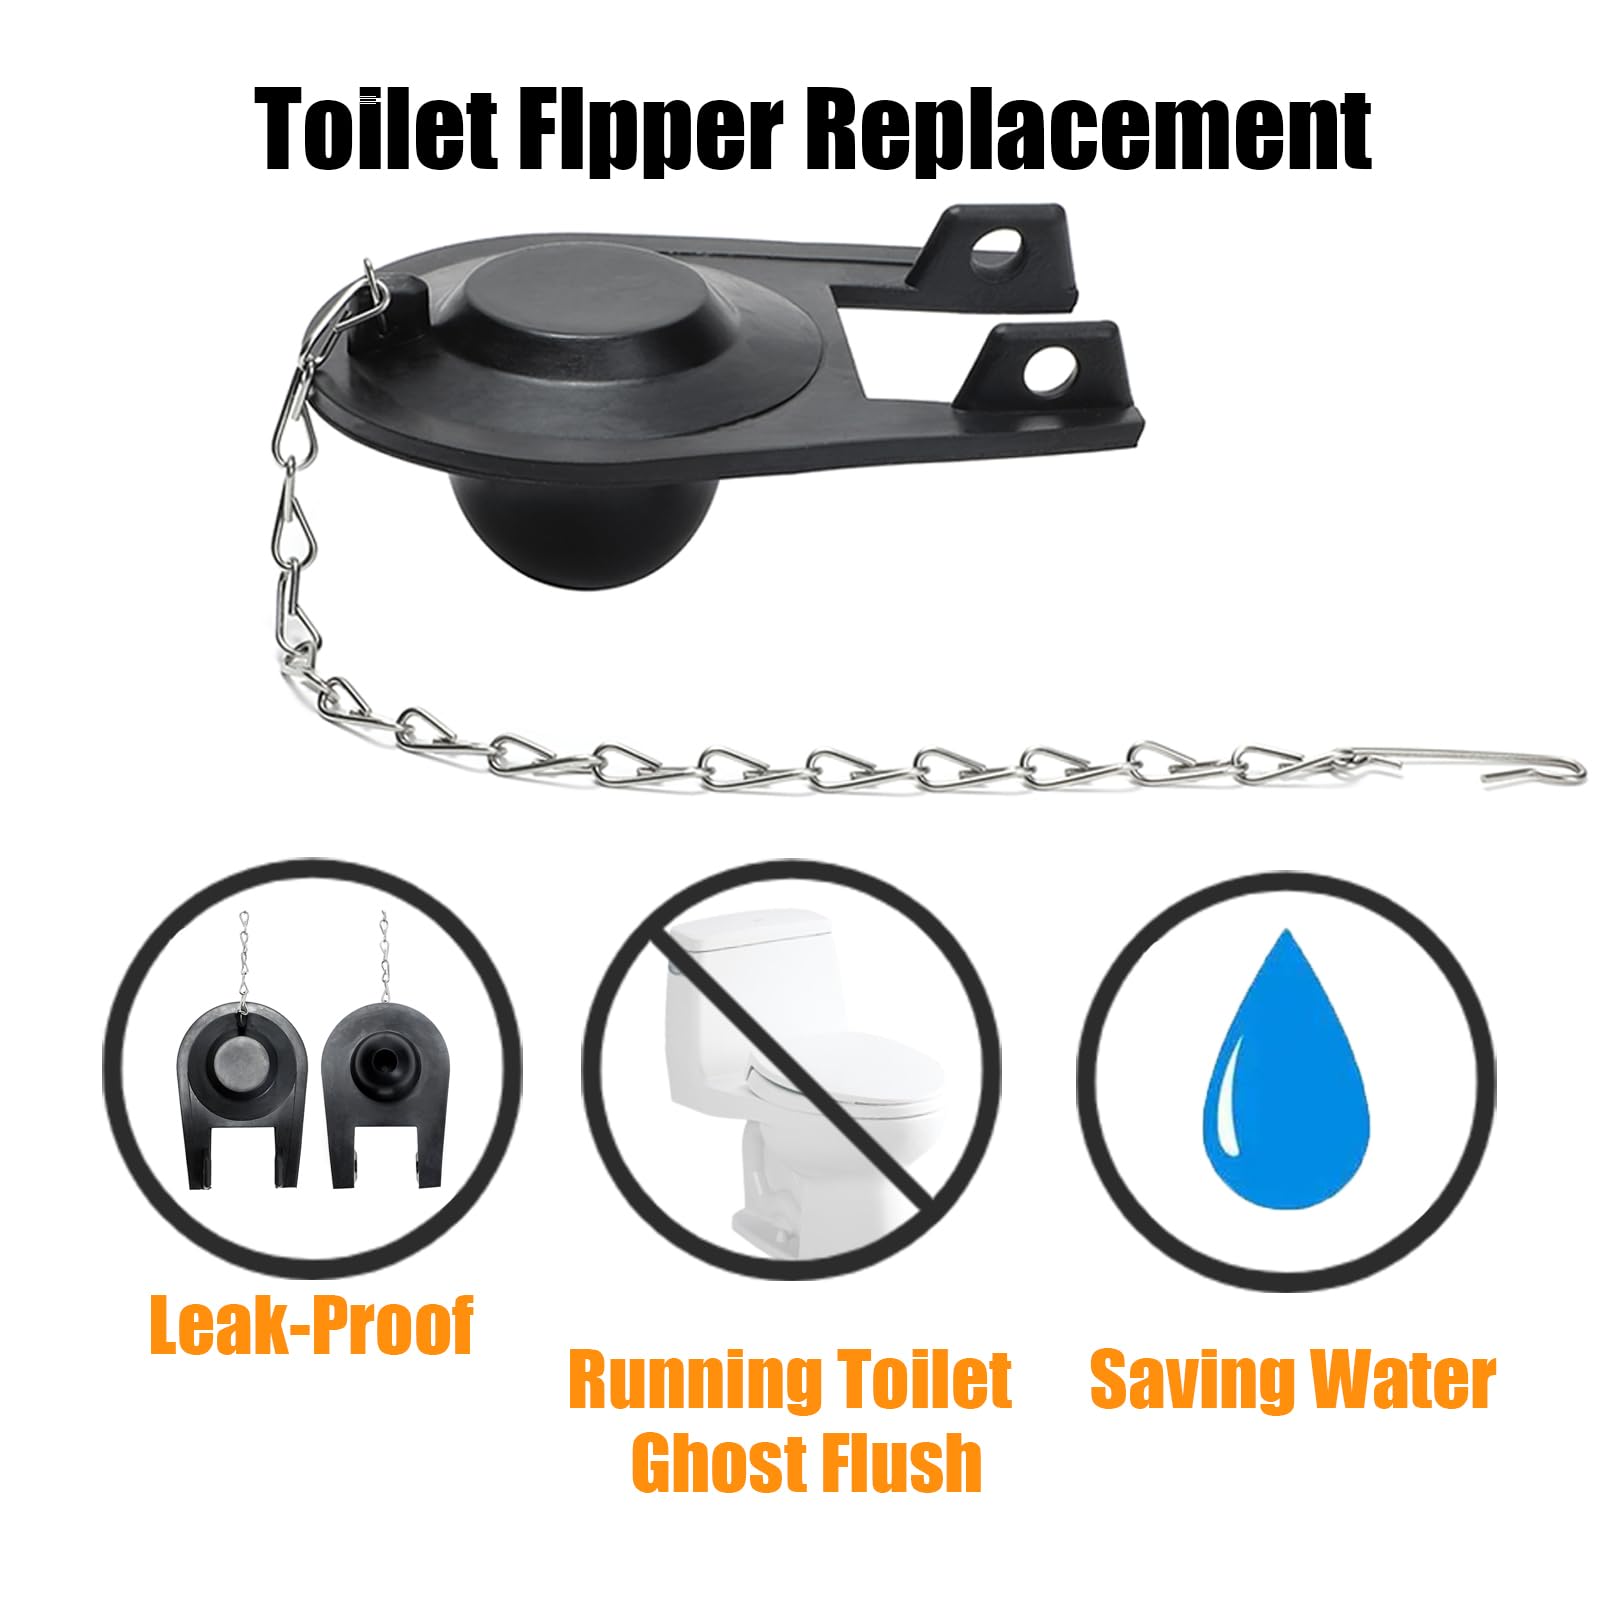 Toilet Flapper Replacement 2 inch Universal Kit with Chain - Easy to Install/Long-Lasting/Water-Saving for American Standard Toilet- 2 Pack